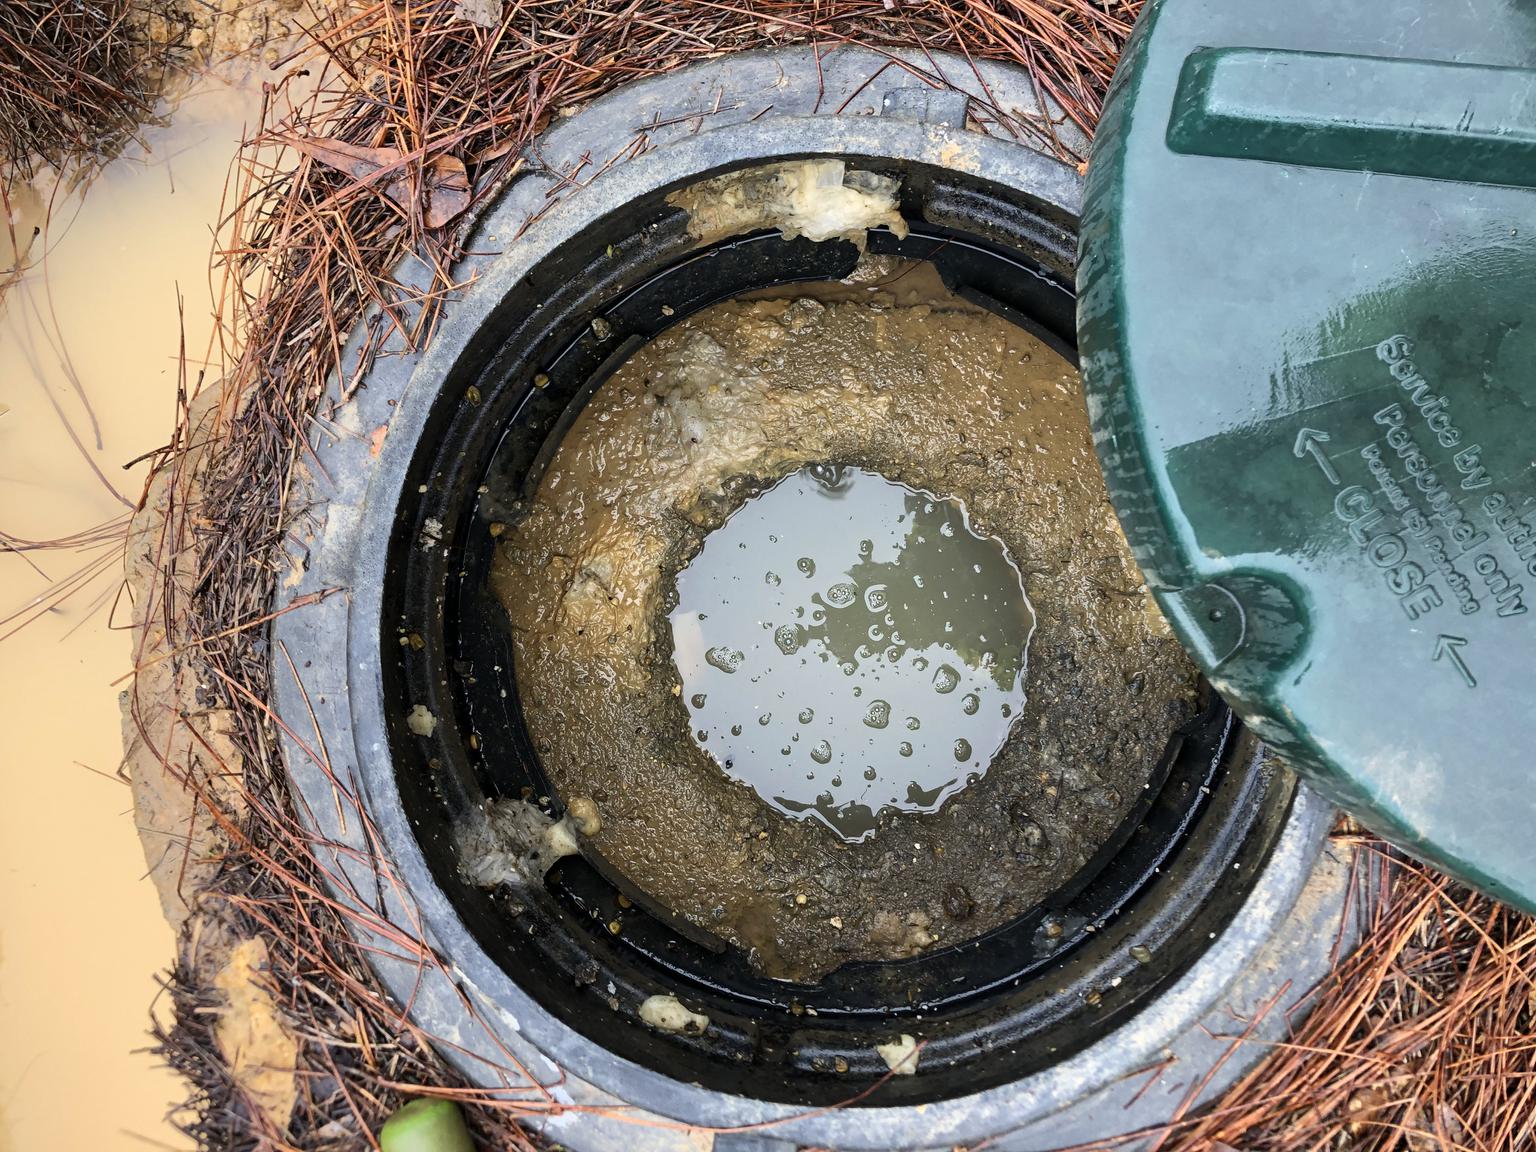 How disinfectant and cleaner disturbing your septic tank and what is best option?